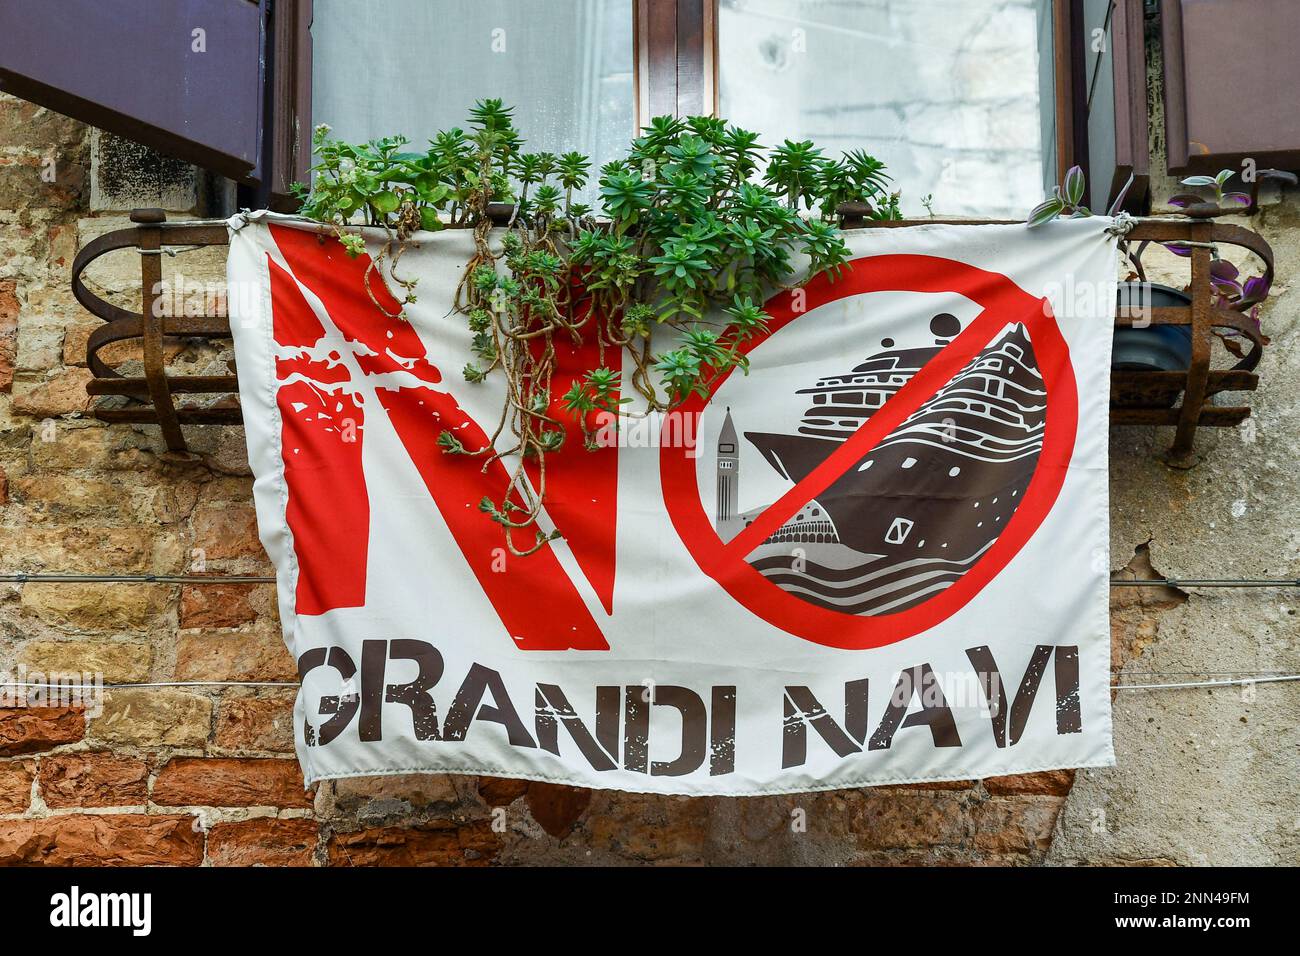 Protest flag that says 'No Big Ships' against the access of cruise ships in the Venice lagoon outside a window in the historic centre of Venice, Italy Stock Photo